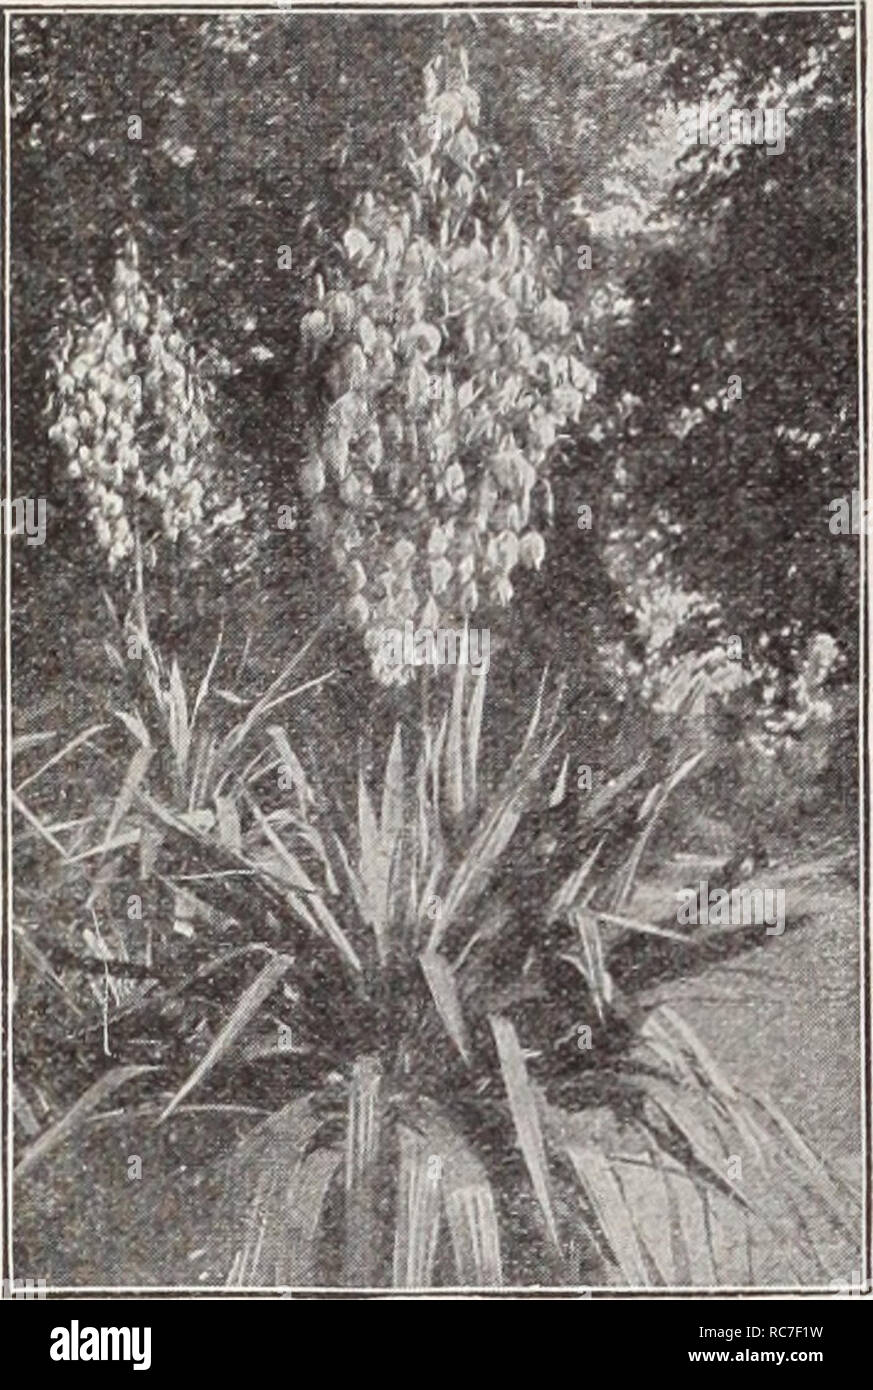 . Dreer's garden book / Henry A. Dreer.. Nursery Catalogue. I HARDY PERENNIAL PIANTS / &quot;PHILTOPHIAPi. Yucca Tunica Saxifraga. A charming little spreading plant growing from 6 to 8 inches high, with minute dark green foliage producing quanti- ties of tiny flowers varying from pale to dark pink. Attractive in the rockery or on the edge of the border. June to August. 25 cts. each; $2.50 per doz. — Flore Plena Rosea. A pretty new double flowering form of the above in which the flowers, besides being double, are also considerably larger than in the type and of a deeper color, as well as being  Stock Photo